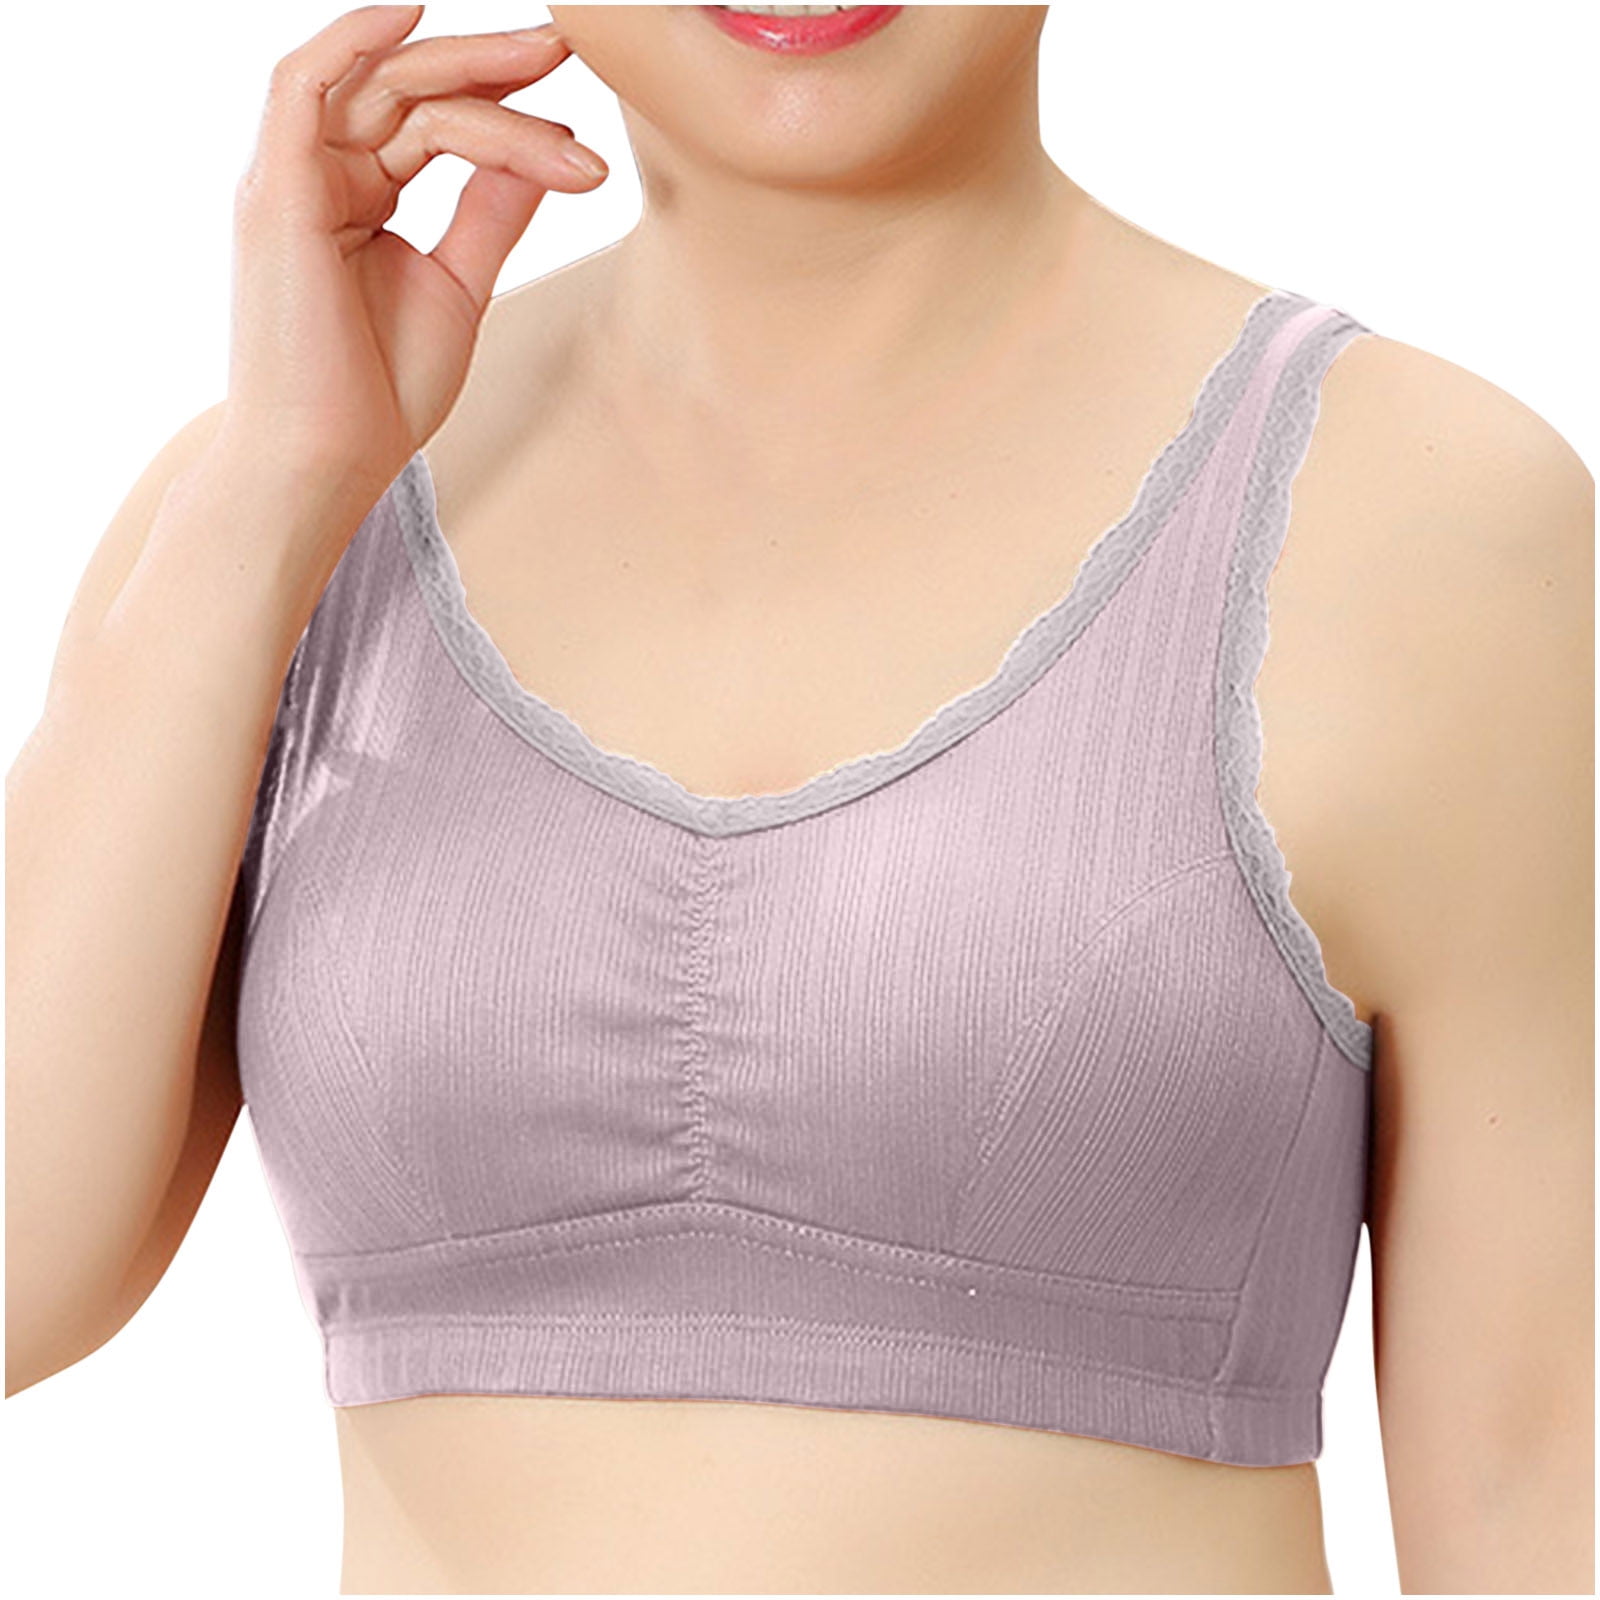 Plain High Neck Strappy Backless Push Up Sports Bra with Removable Pads  Fitness Crop Top Medium Support Yoga Jogging Bras - AliExpress